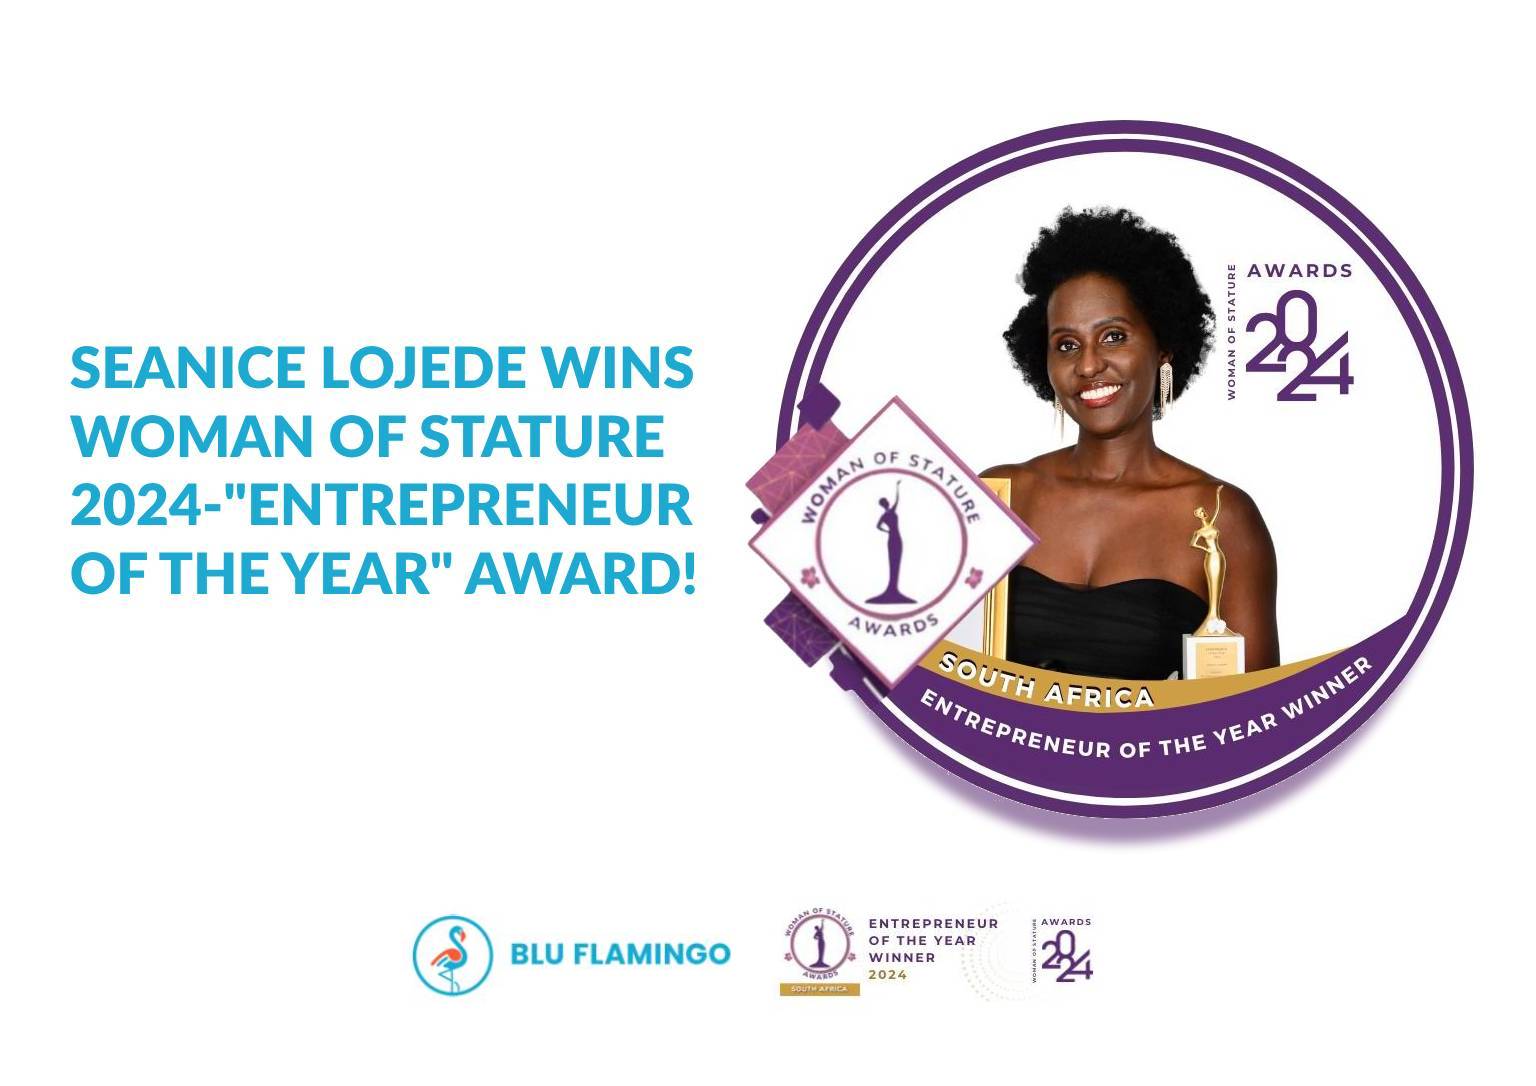 You are currently viewing SEANICE LOJEDE ANNOUNCED AS THE ENTREPRENEUR OF THE YEAR WINNER OF THE WOMAN OF STATURE™ AWARDS SOUTH AFRICA 2024